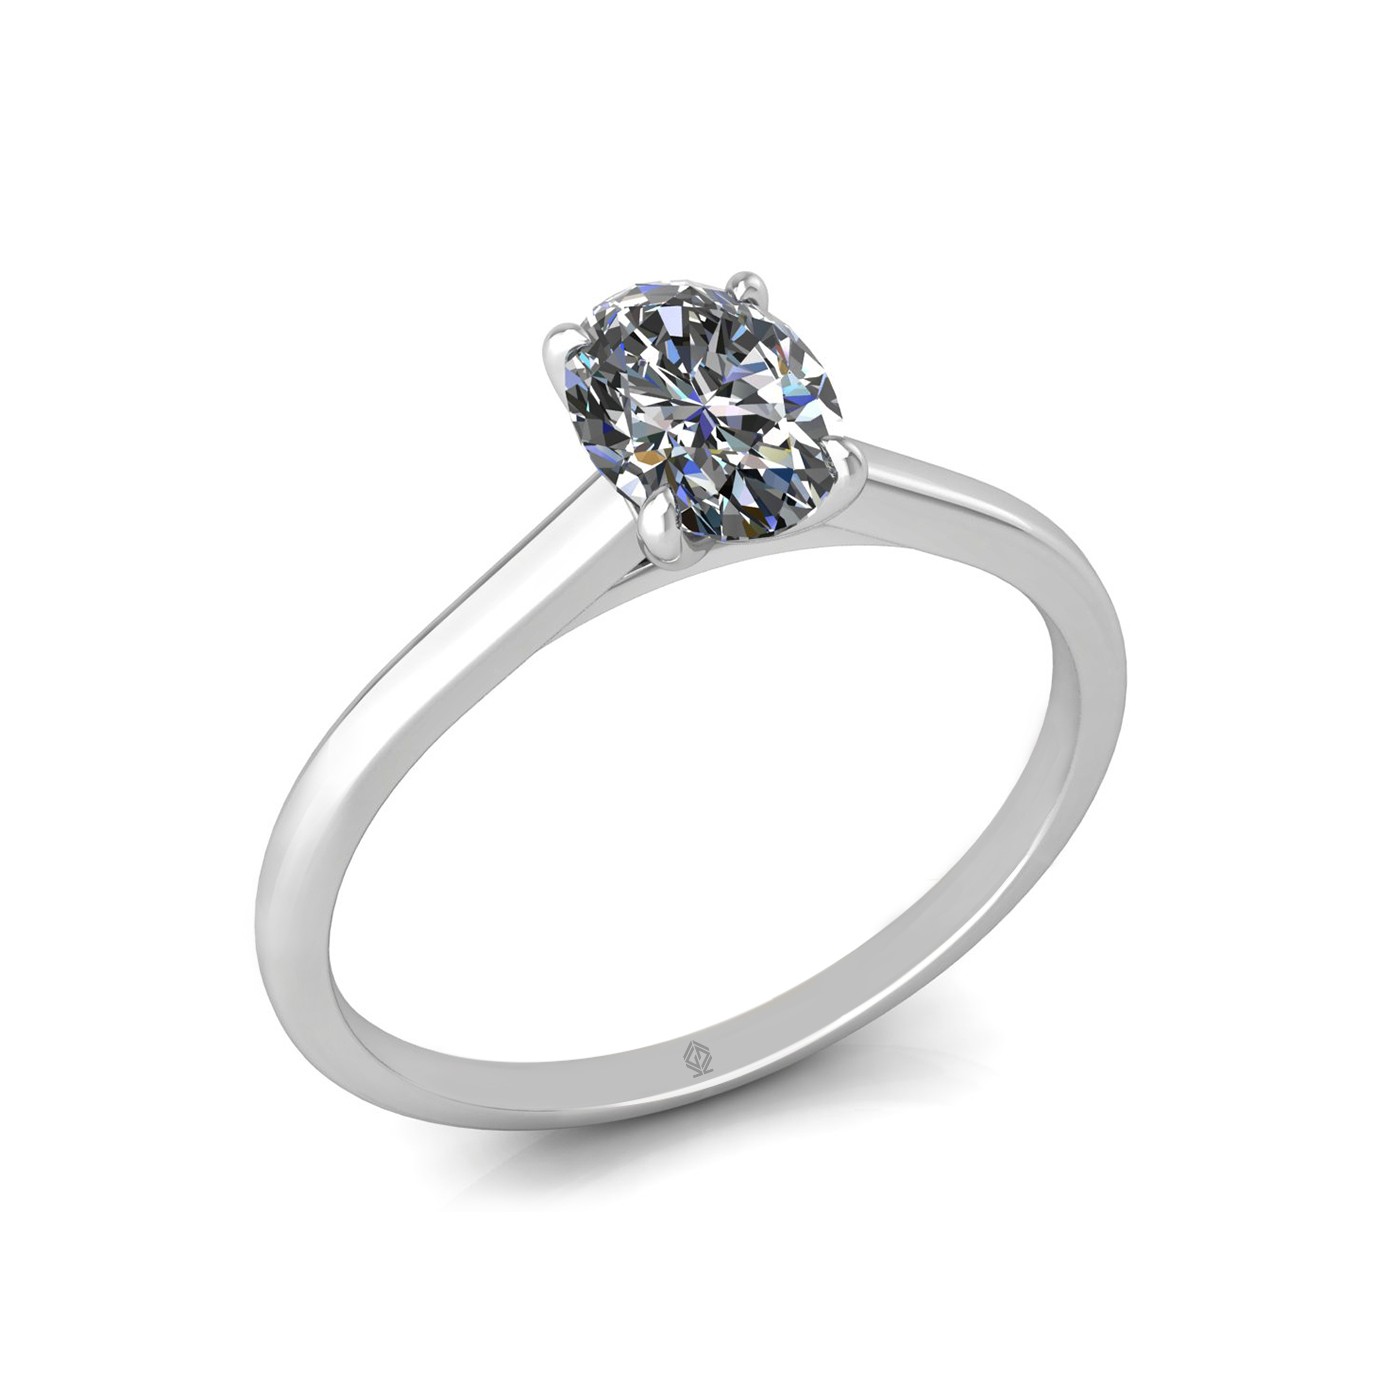 18k white gold  0,80 ct 4 prongs solitaire oval cut diamond engagement ring with whisper thin band